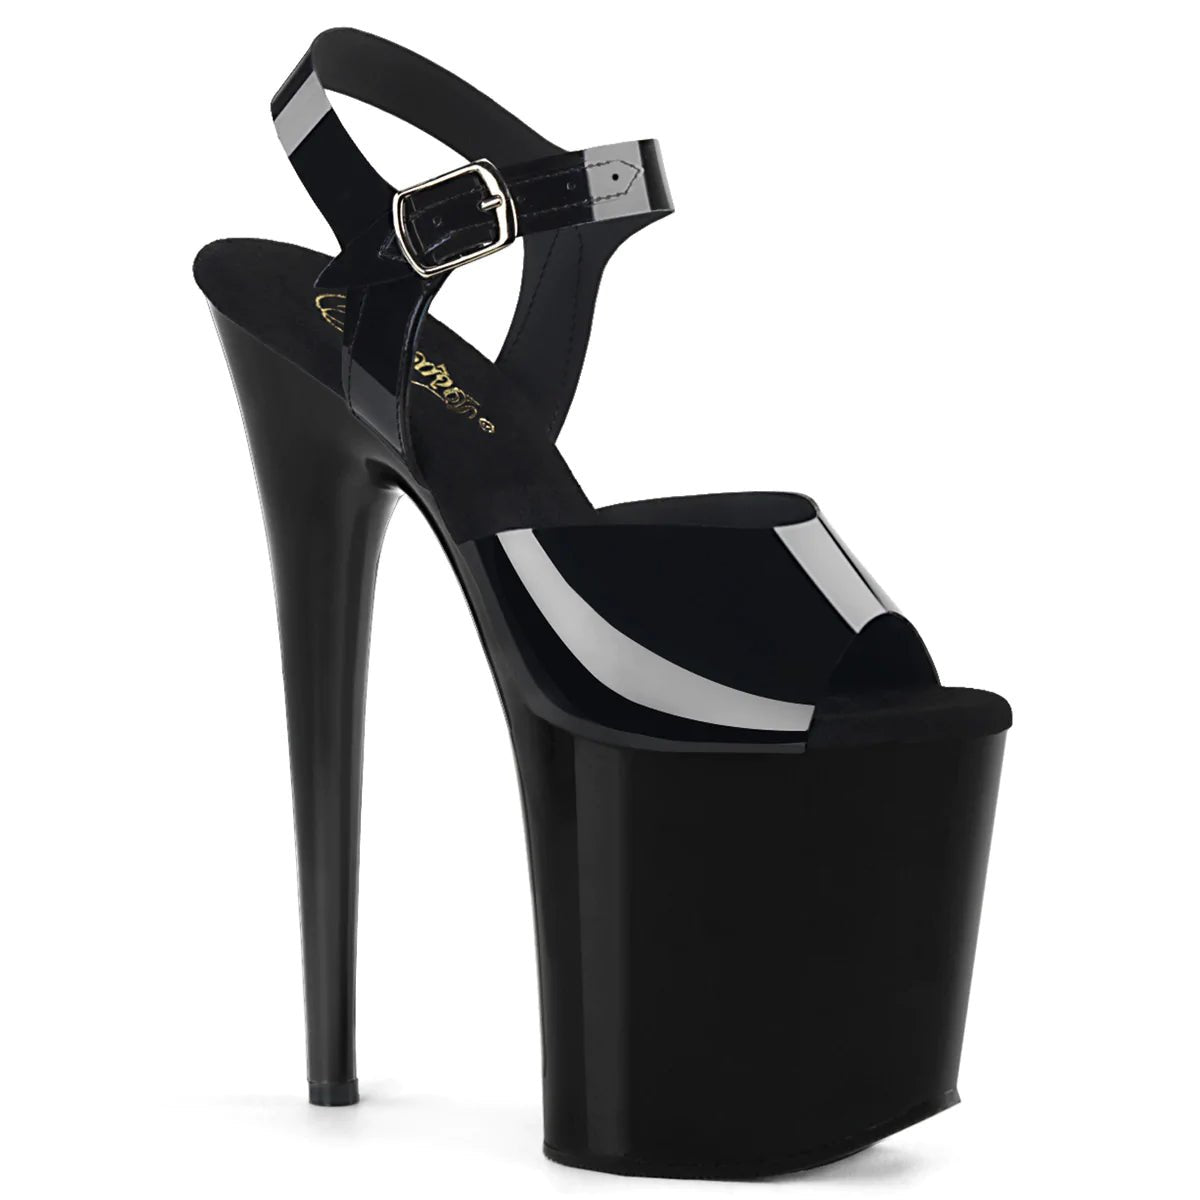 Pleaser Shoes FLAMINGO-808N | 8 INCH Jelly-Like Pleaser Heel - Black - Aphrodite Active